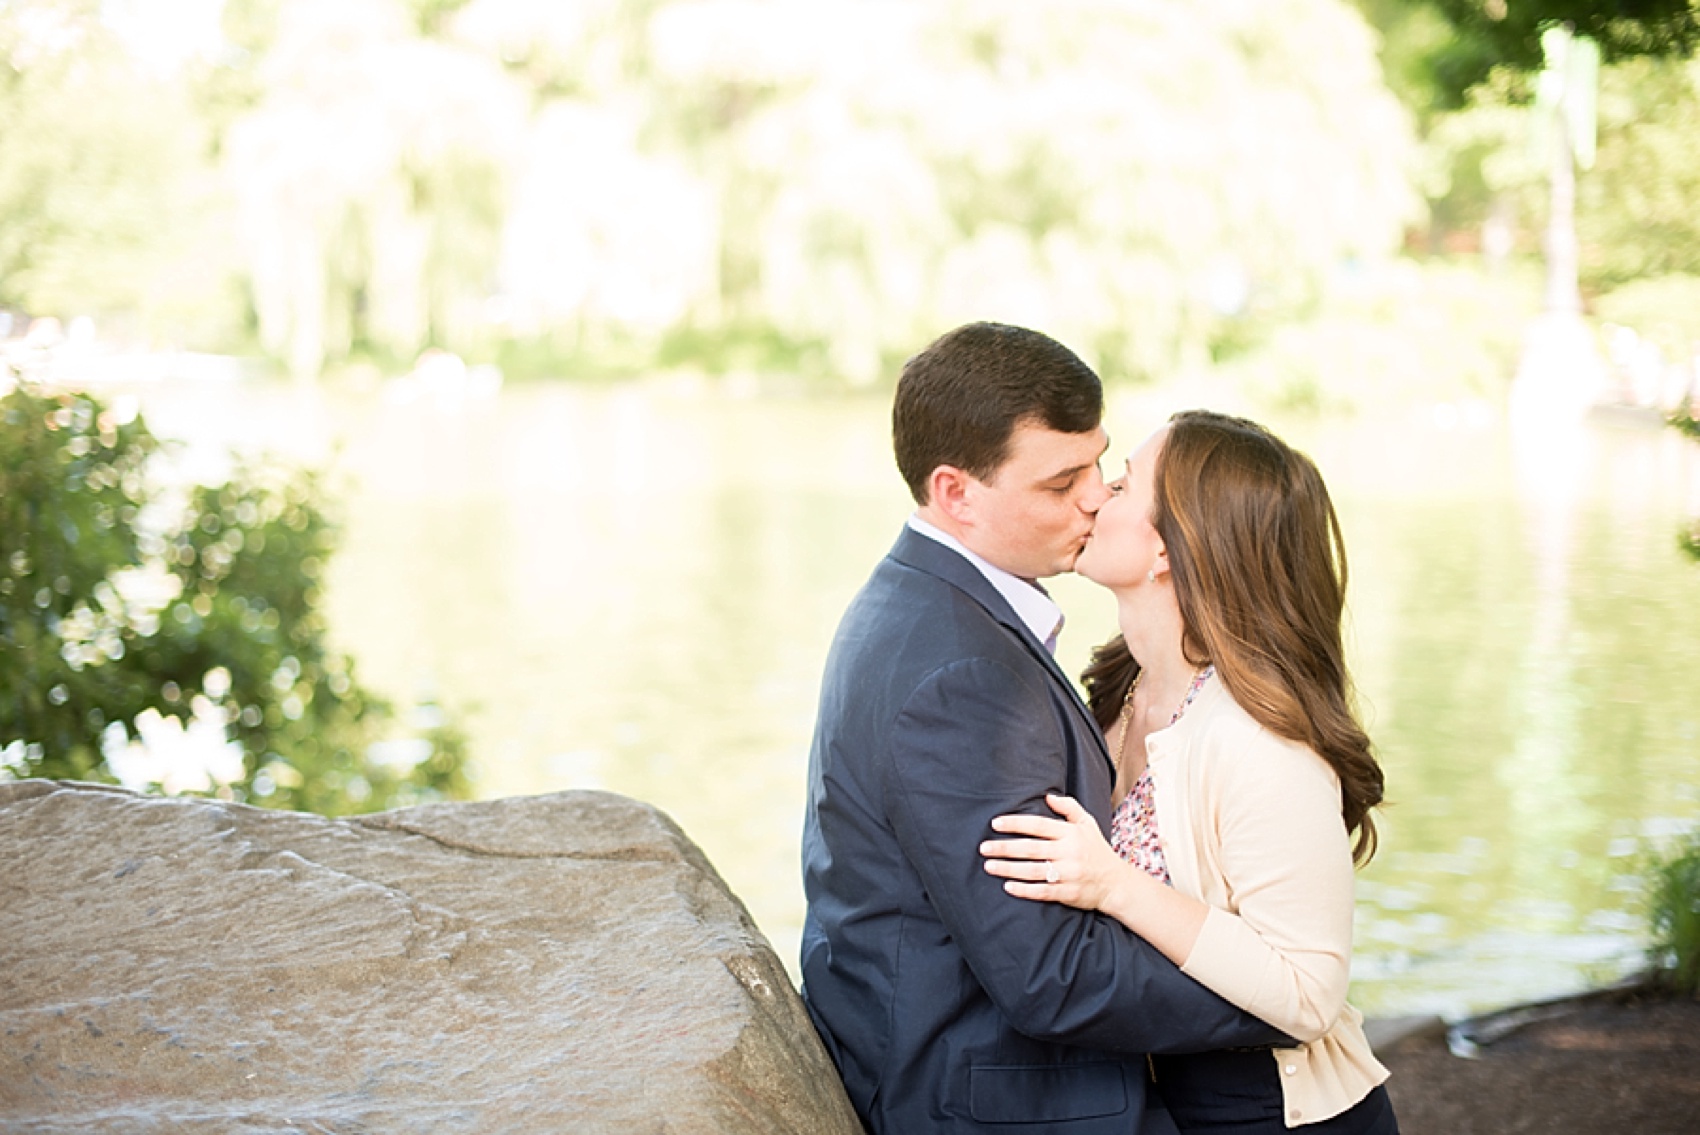 Central Park Engagement session by NYC wedding photographer Mikkel Paige Photography.